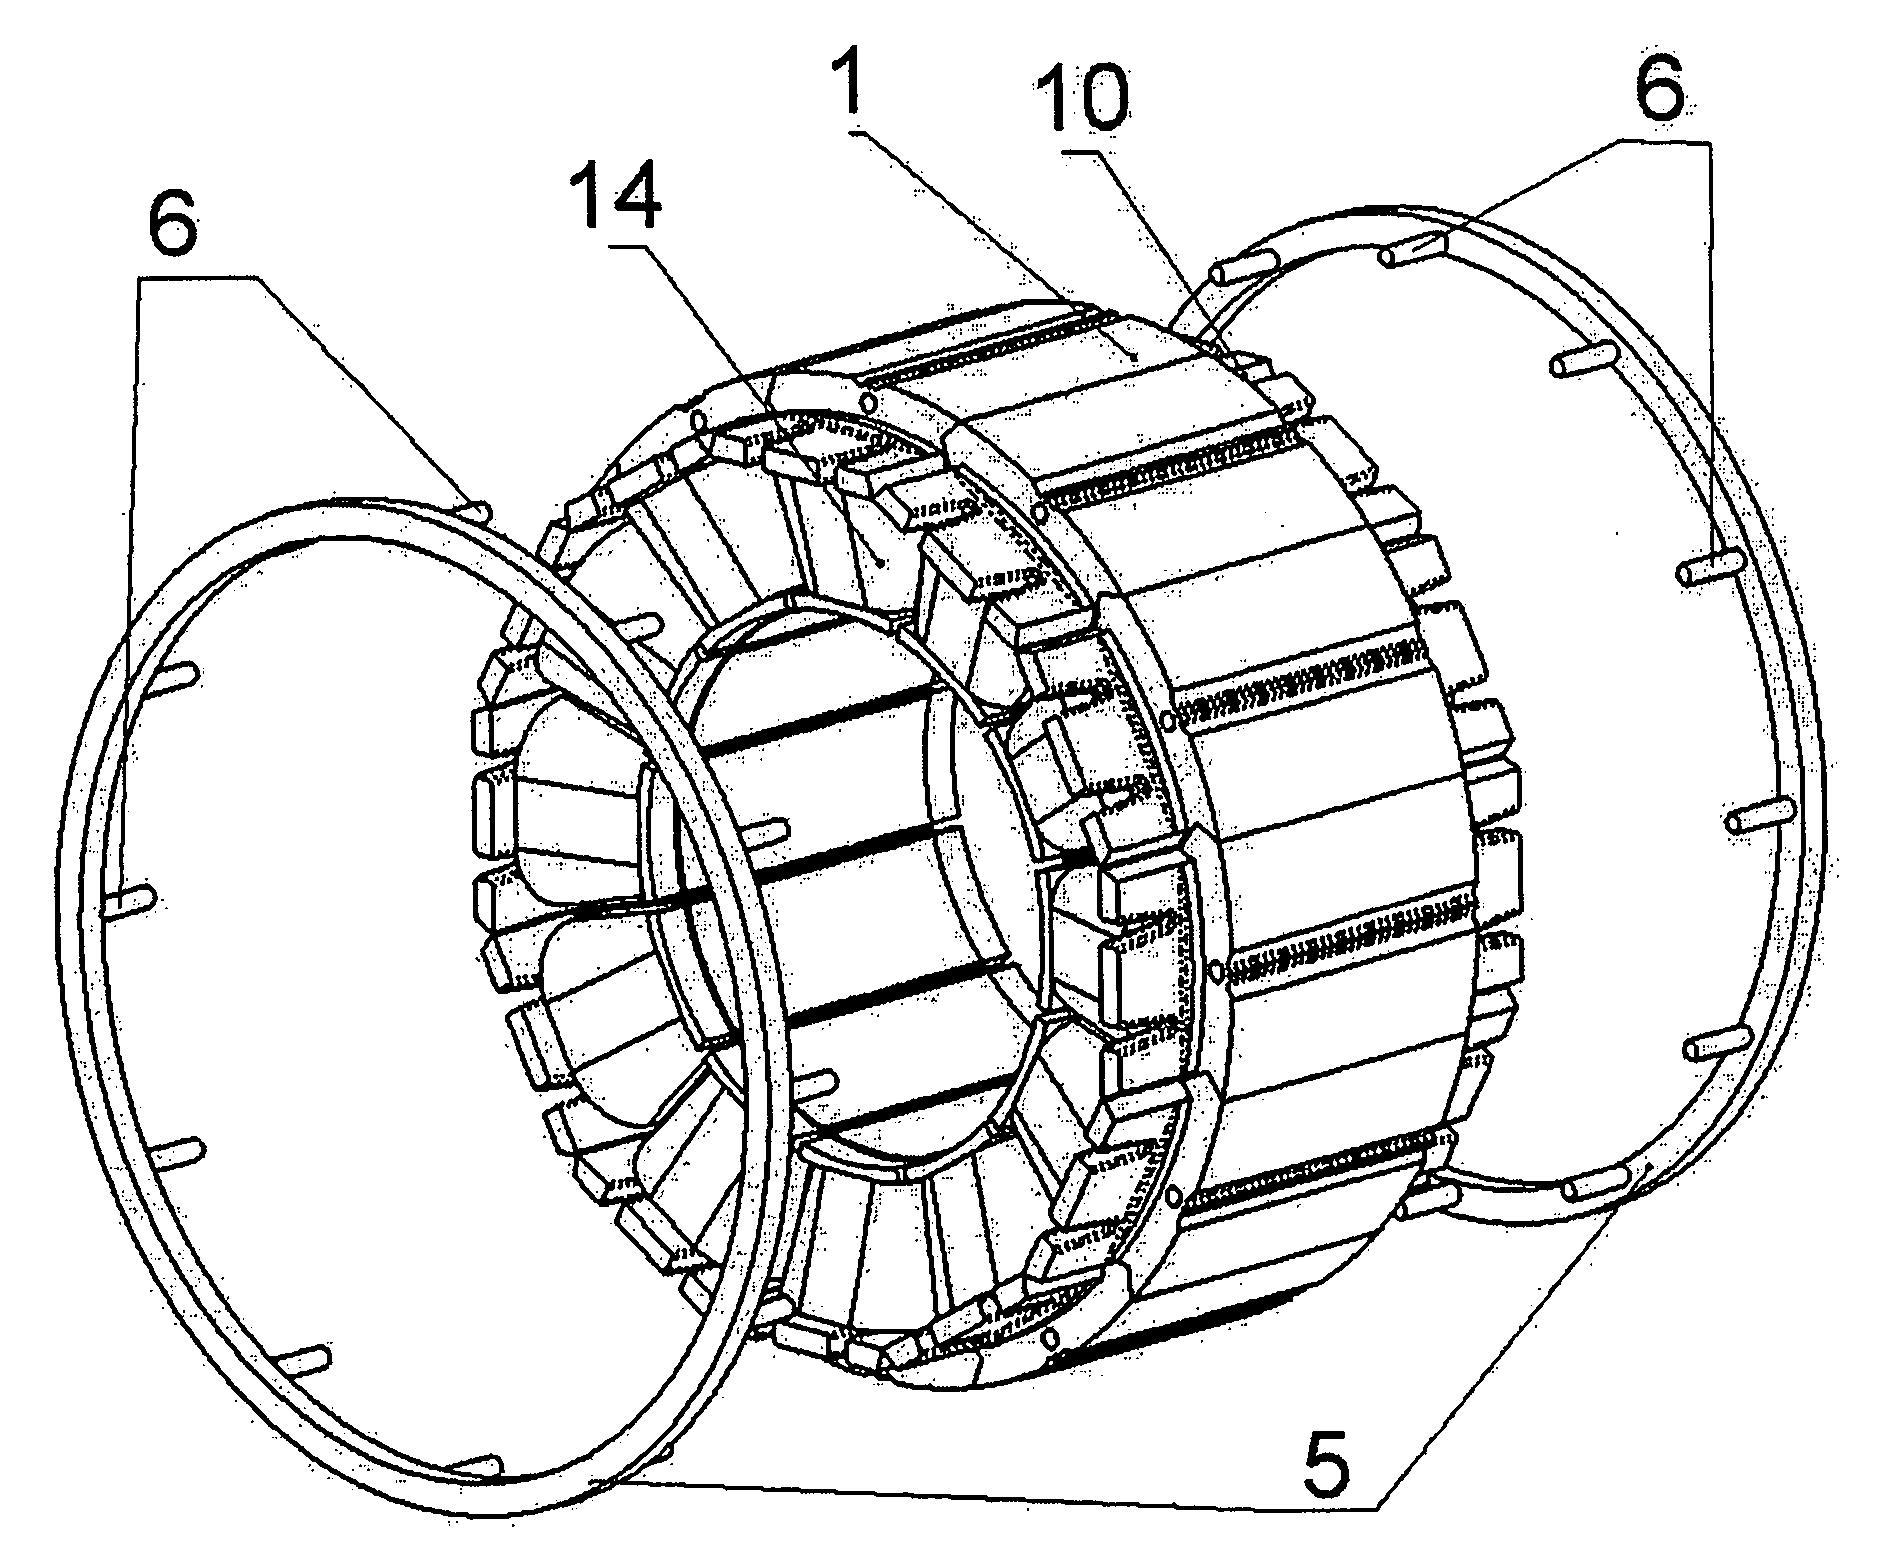 Electric Motor and Method for Manufacturing an Electric Motor